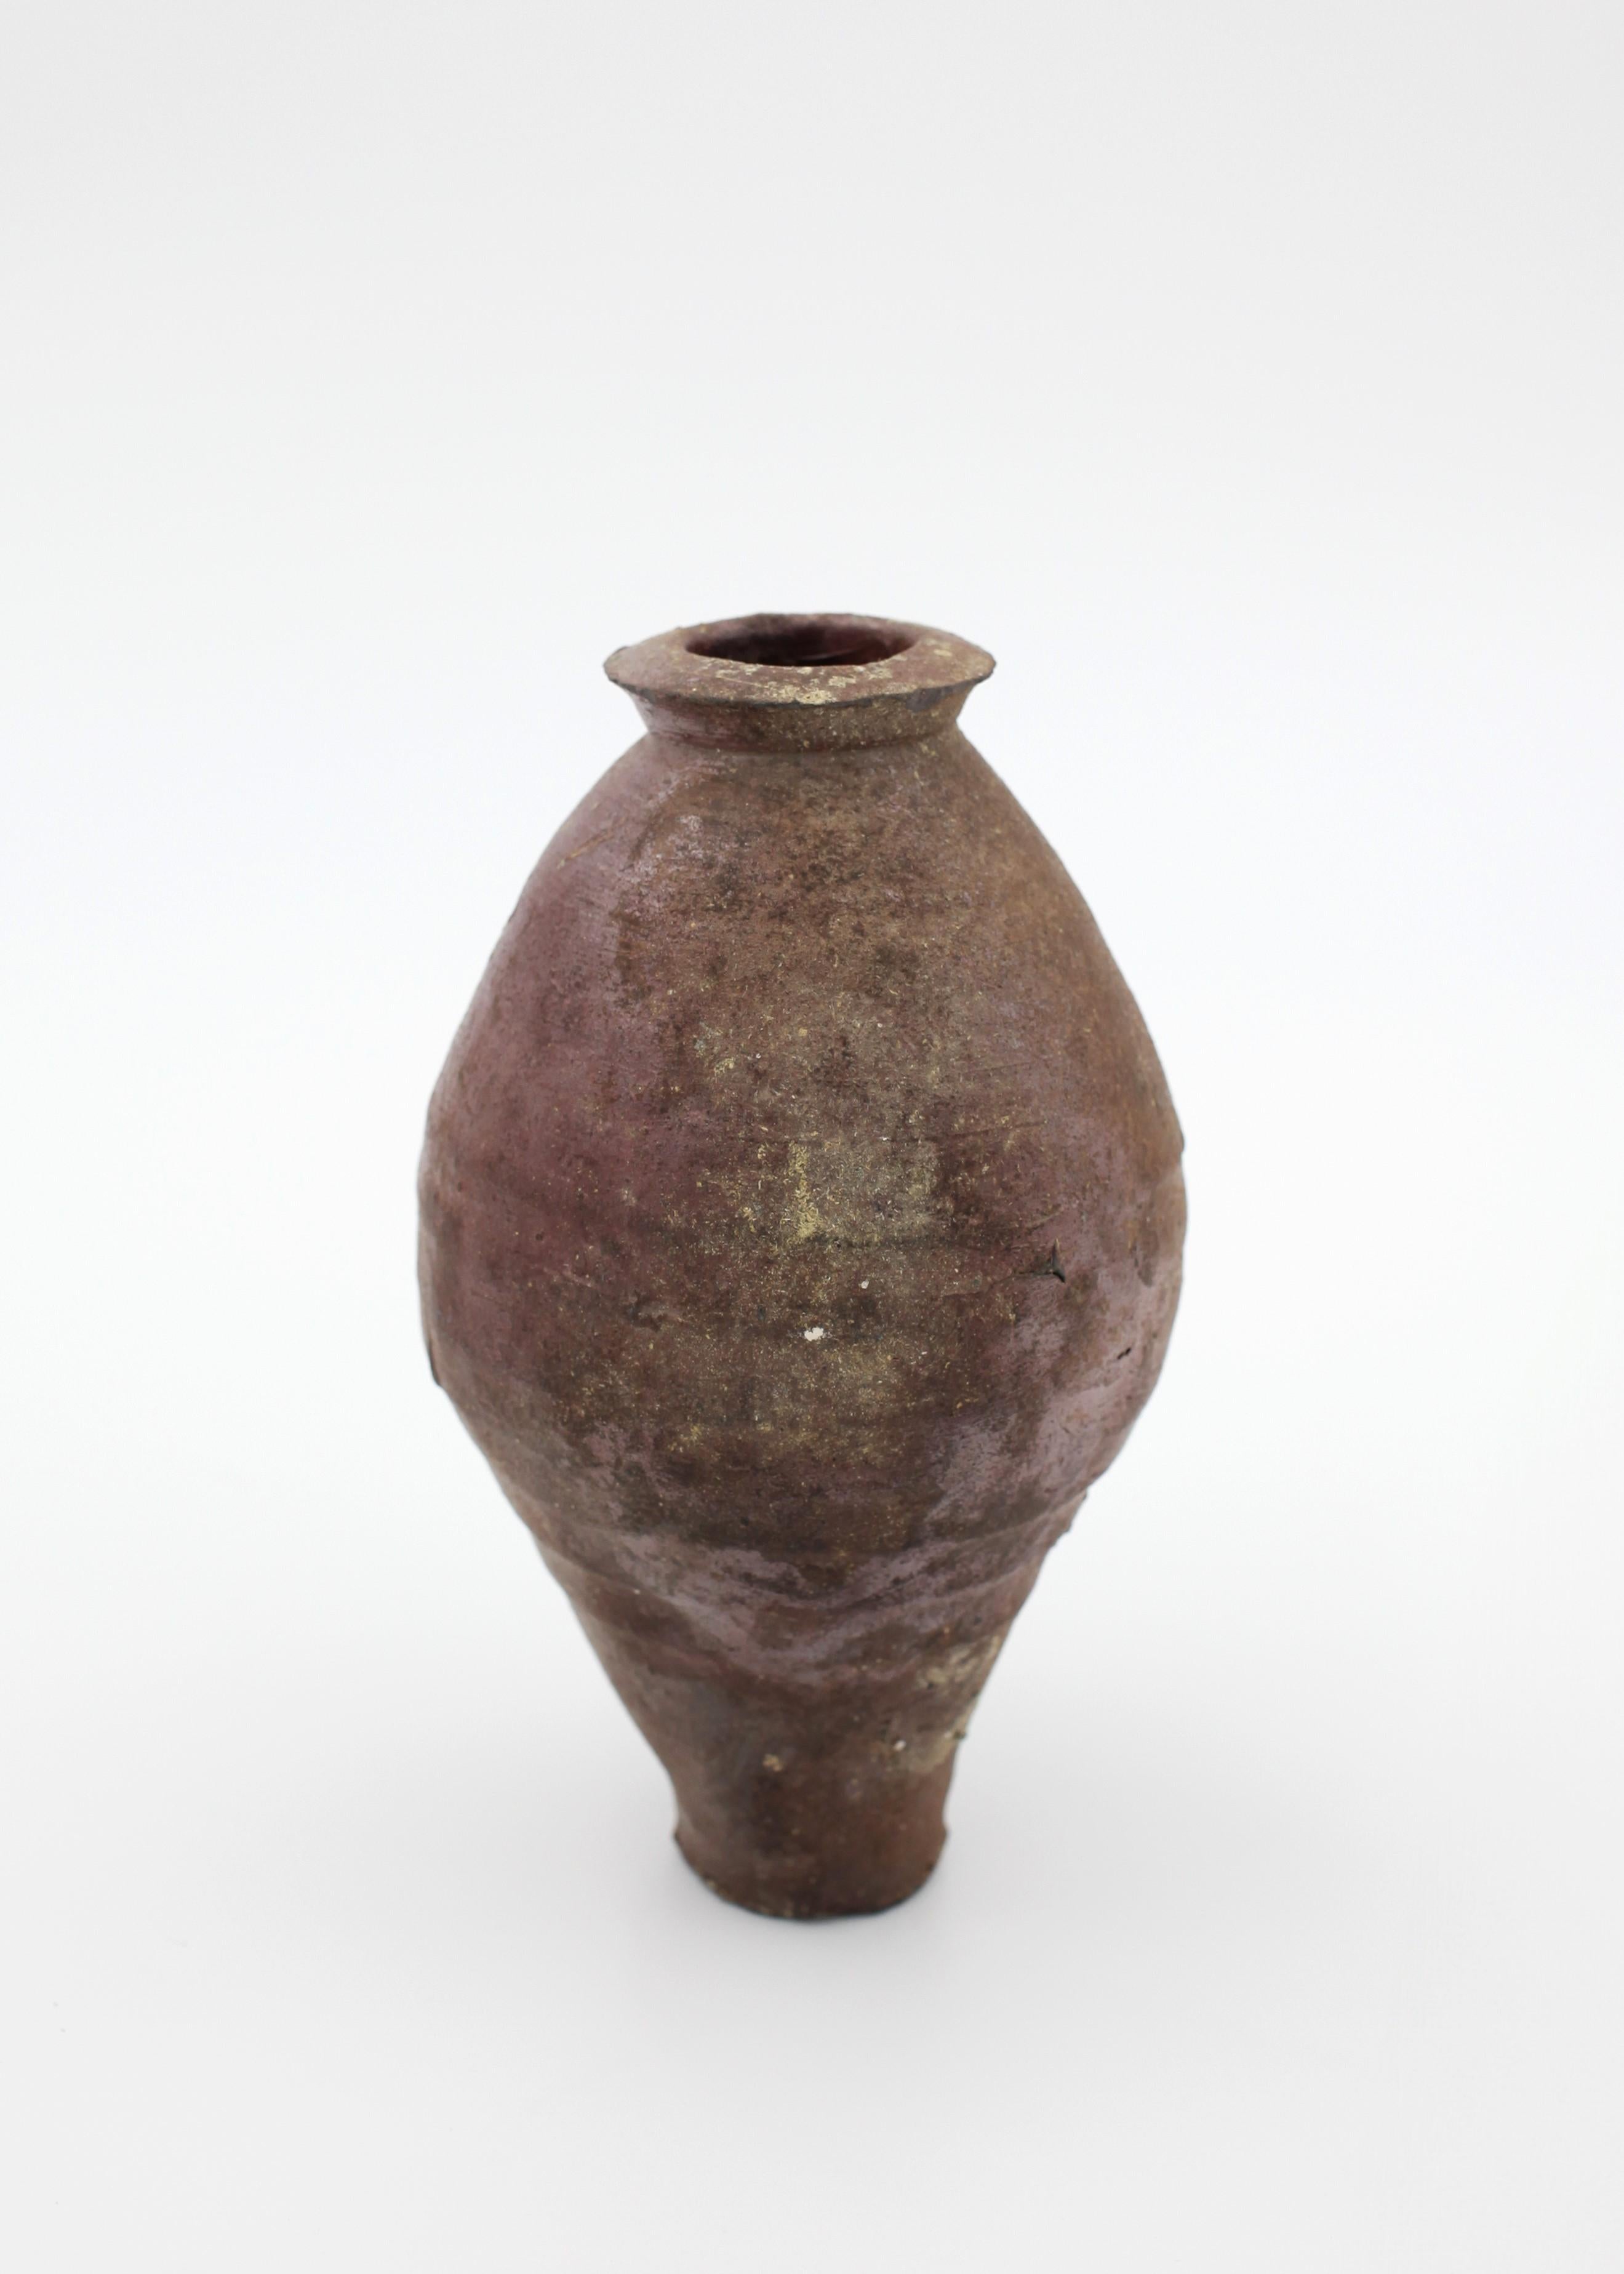 Hand-Crafted 14th To 16th Century Asian Jar/vessel (Possibly Khmer) For Sale